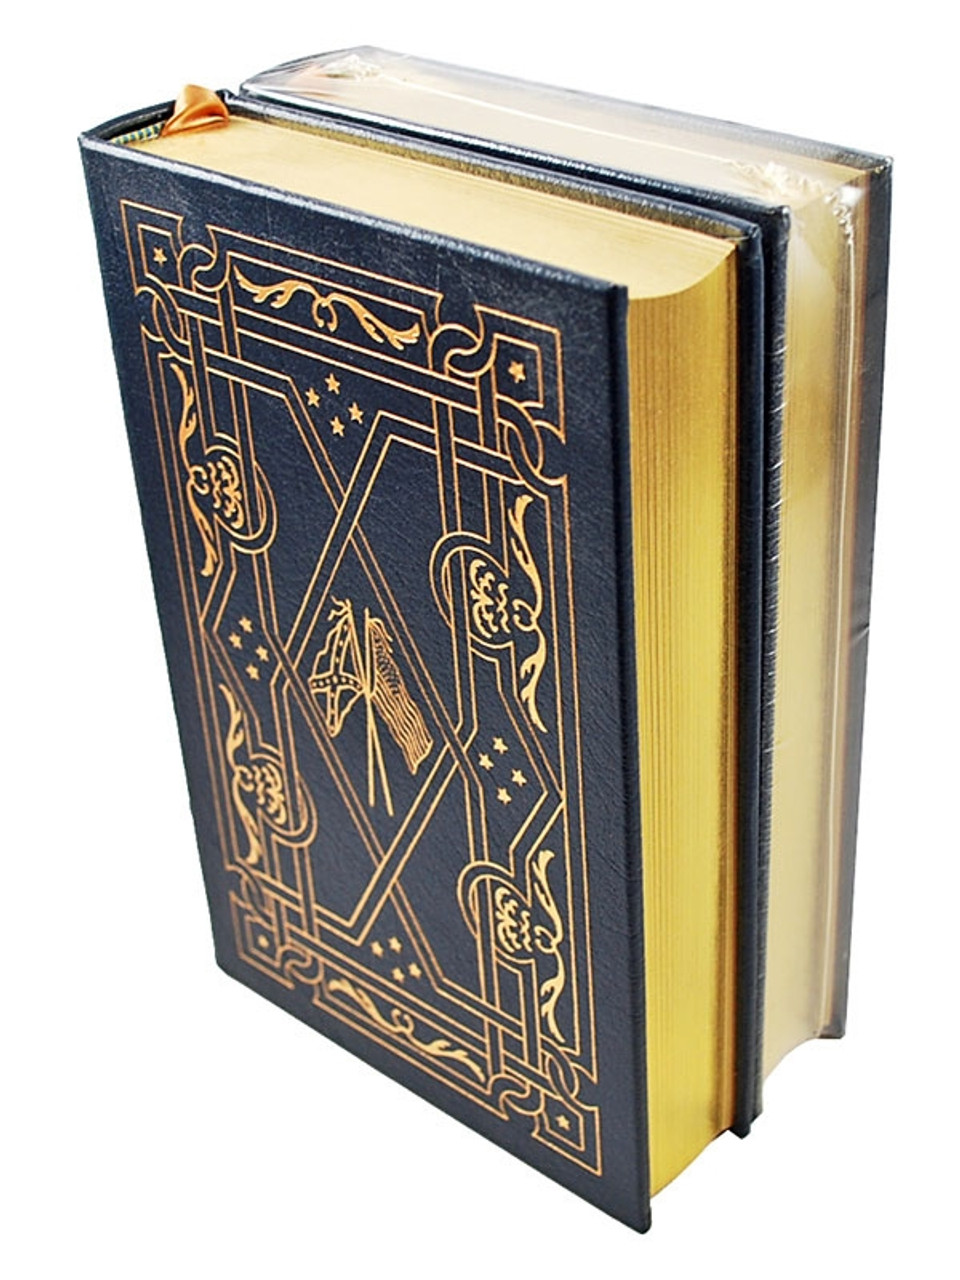 Easton Press "Race To Space" Leather Bound Limited Edition, 5 Vol. Complete Matched Set [Very Fine]